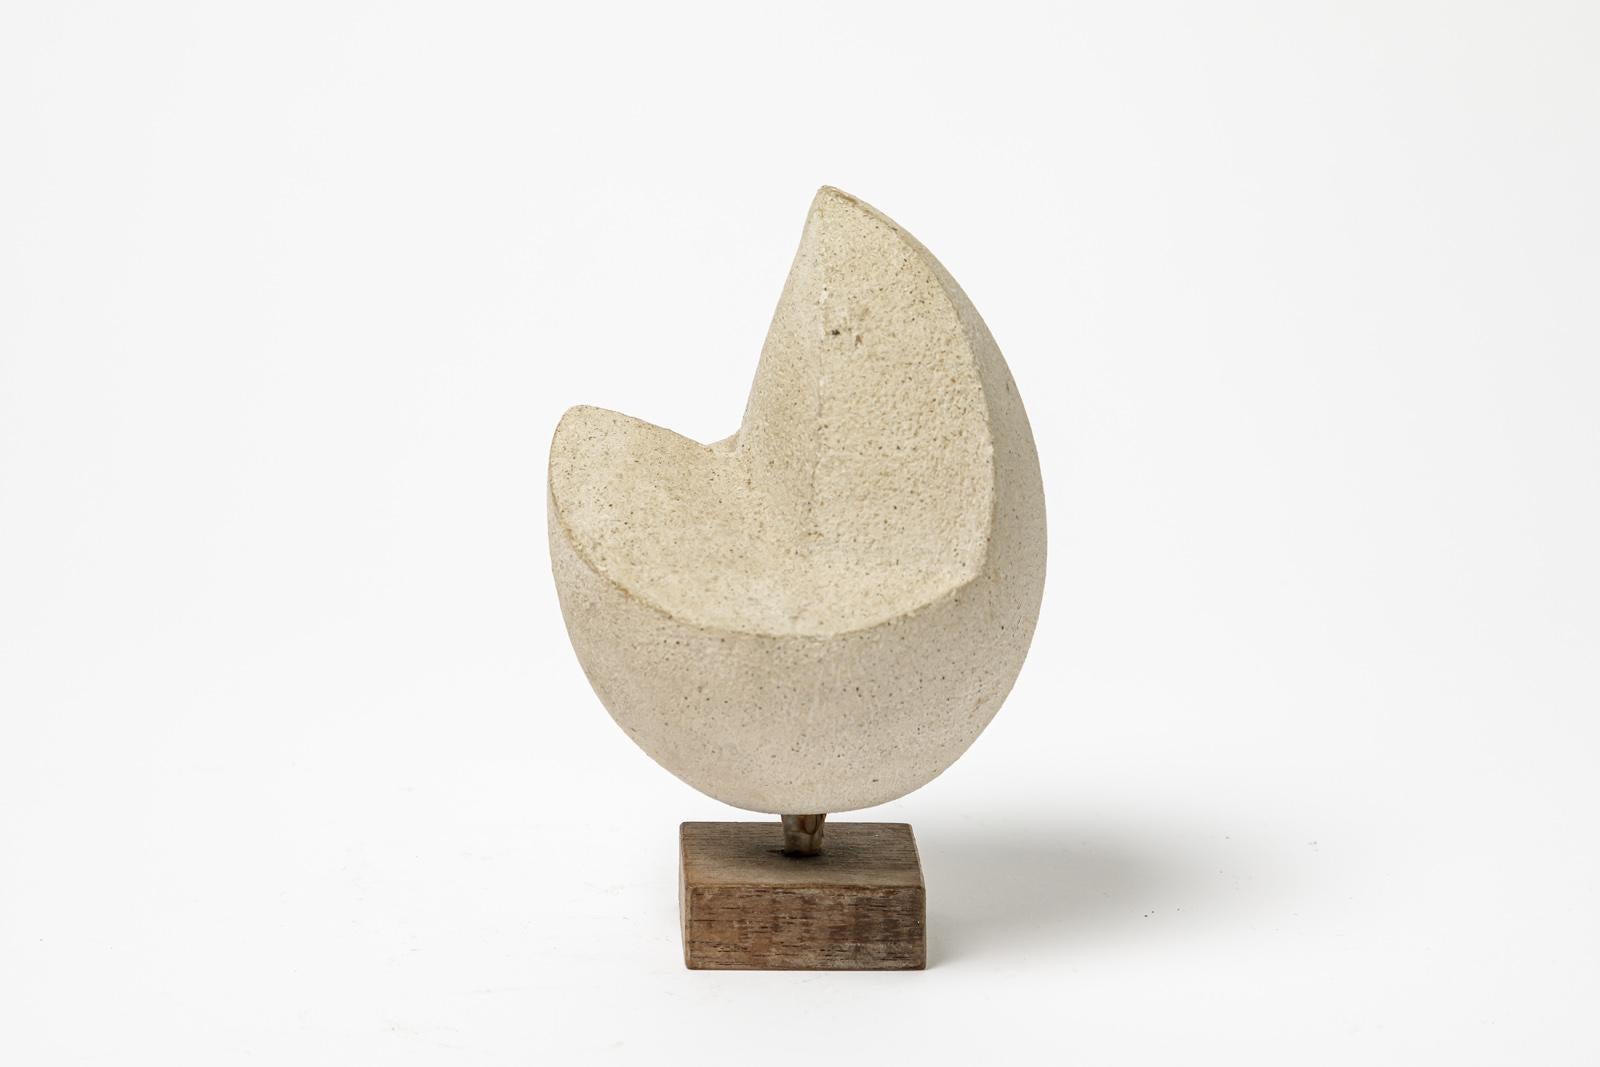 M. MARIE 

Abstract free form by M. Marie

White stoneware ceramic sculpture realised circa 1950

Original perfect condition

Signed 

Height 14 cm
Large 8 cm.